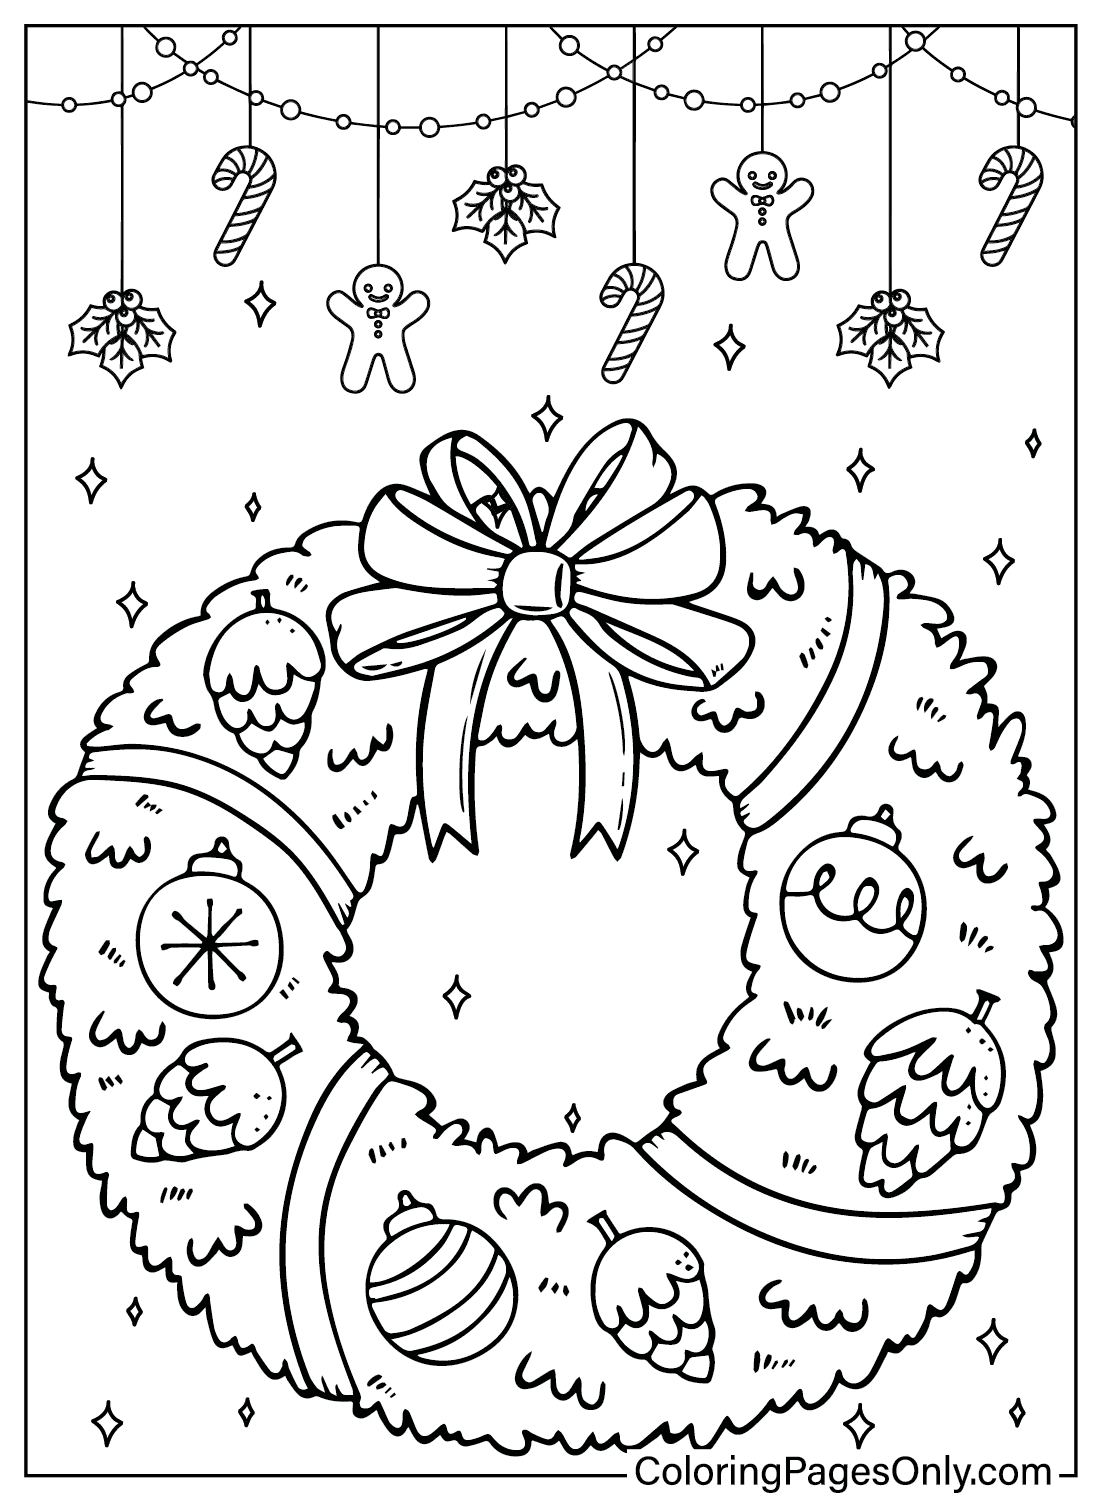 Free Christmas Wreath Coloring Page Coloring Page